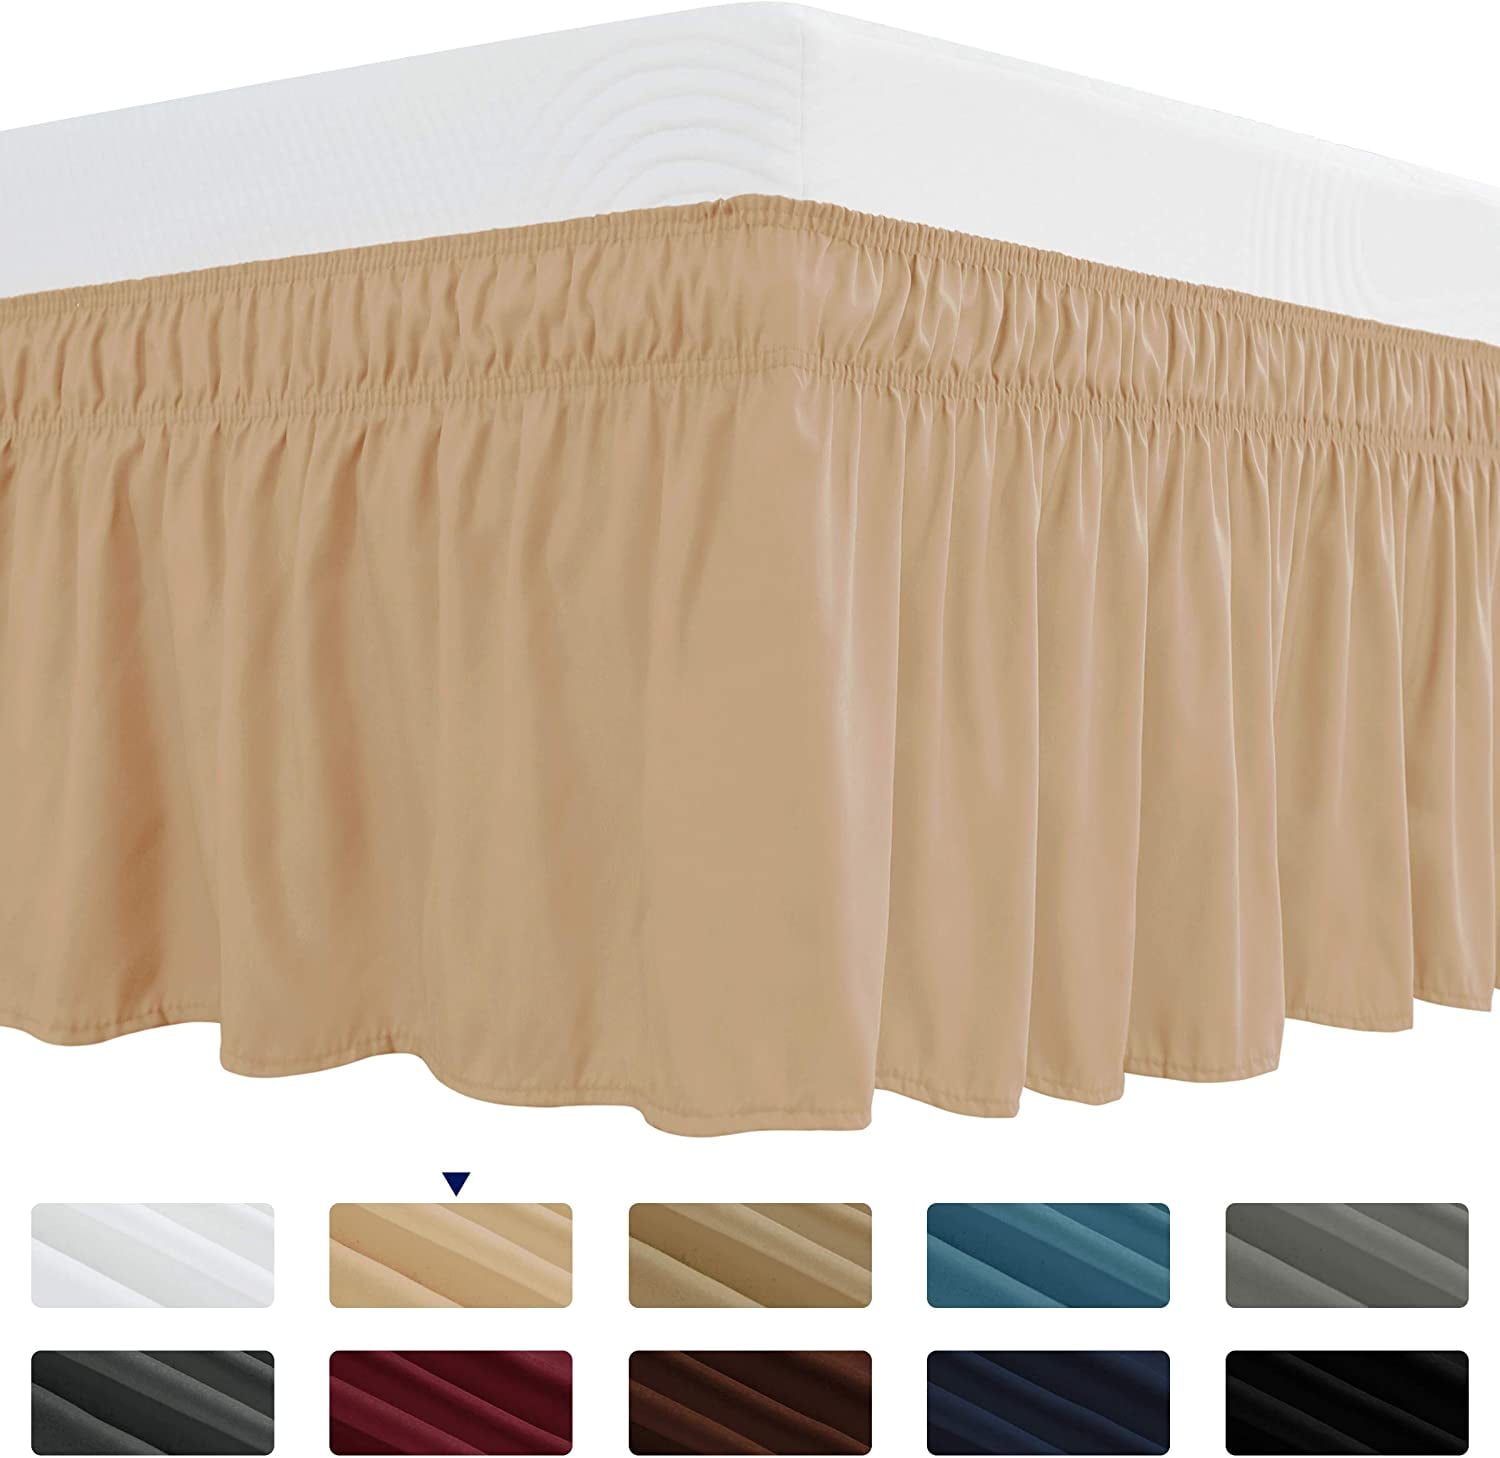 Queen Elastic Dust Ruffle Bed Skirt Easy Fit Wrap Around Bed 16" Drop Khaki Soft 